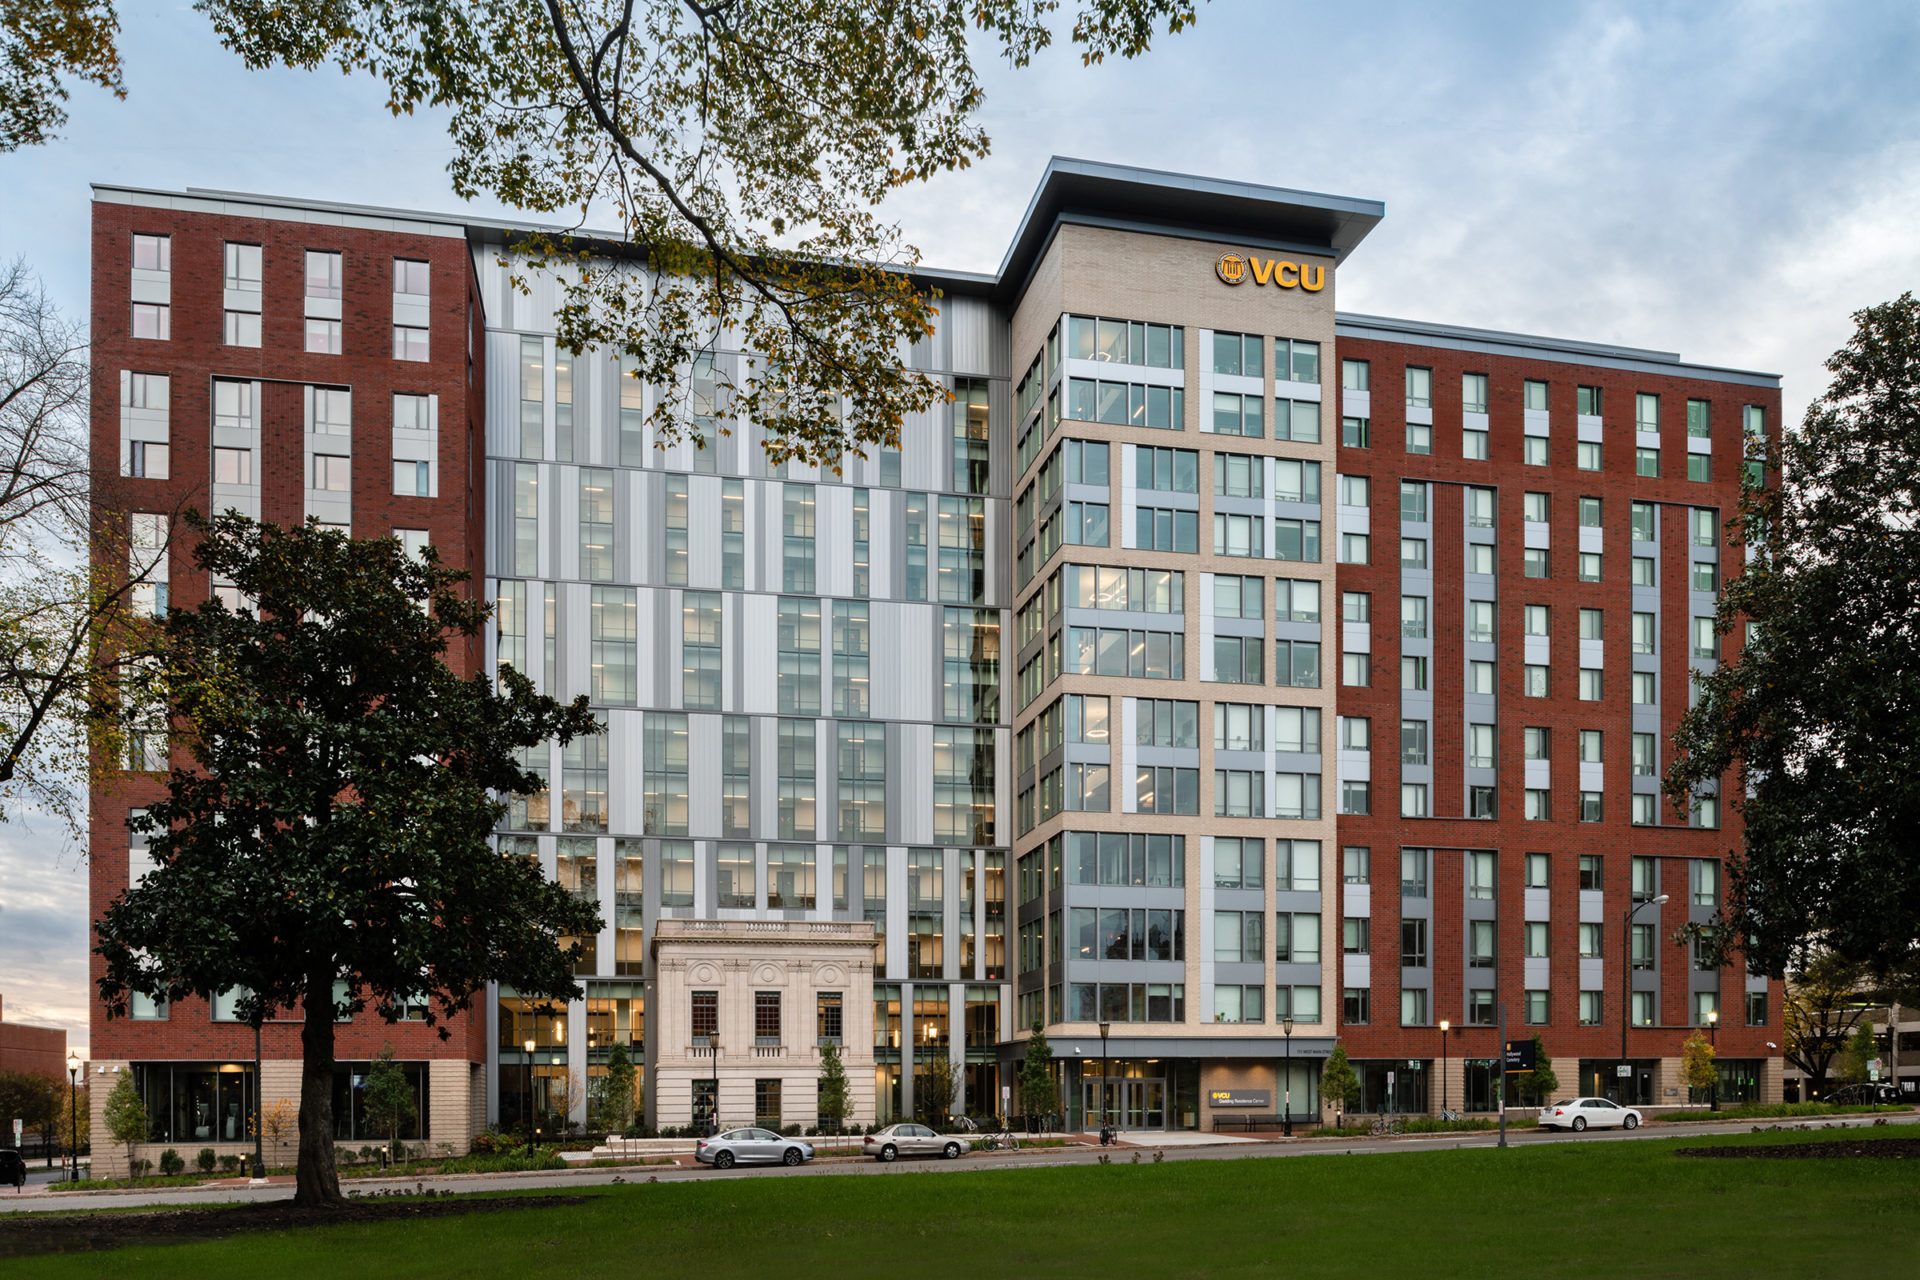 Gladding Residence Center at Virginia Commonwealth University in Richmond, Virginia; Clark Nexsen served as Architect and Engineer of Record